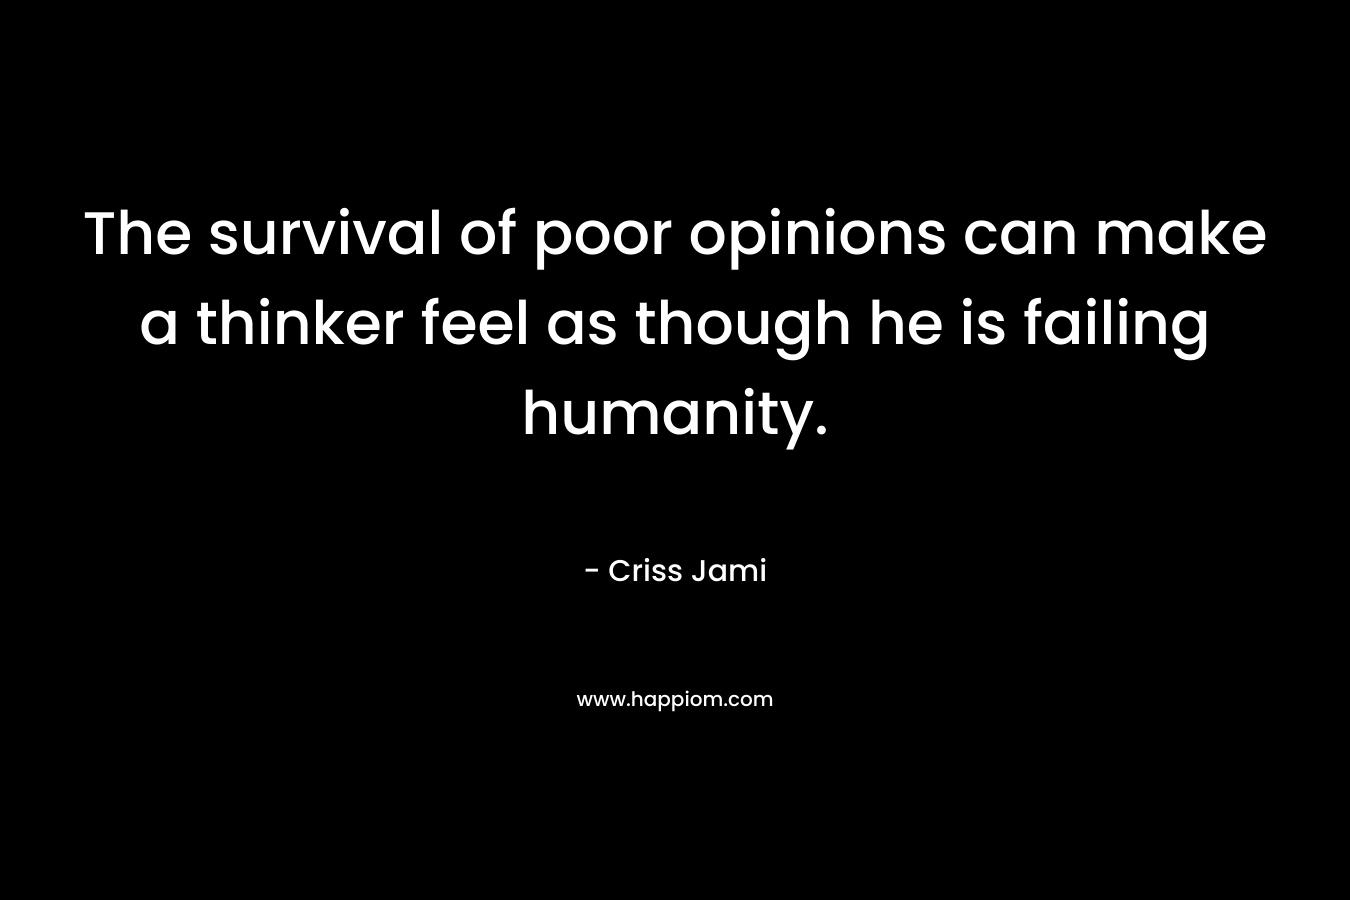 The survival of poor opinions can make a thinker feel as though he is failing humanity.